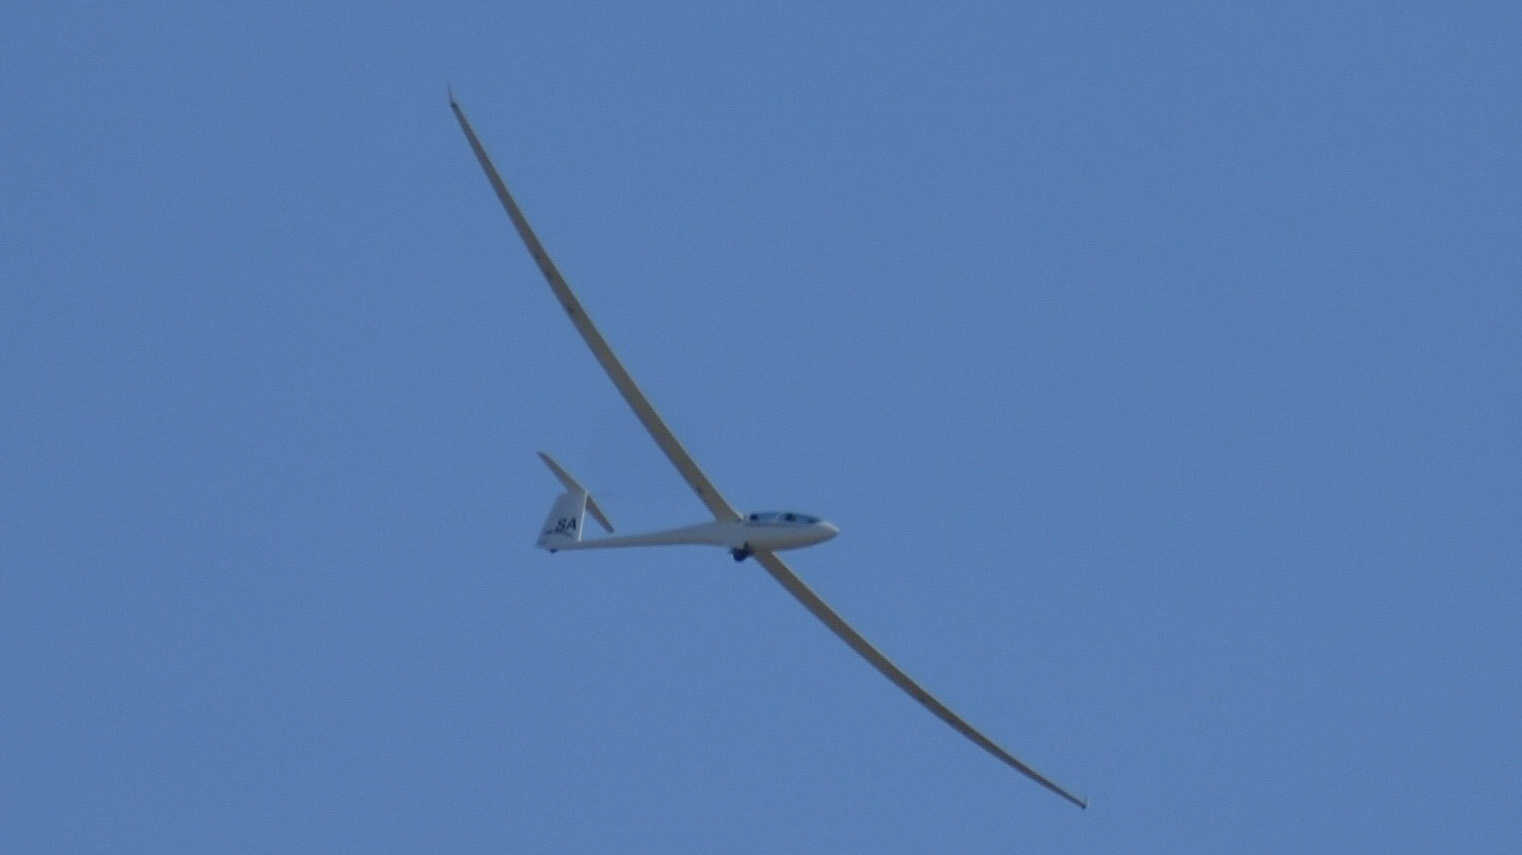 Test pilot Jim Payne piloted a successful first flight of a glider with fly-by-wire aileron and flap controls. Photo courtesy of Paulo Iscold/Nixus Project.